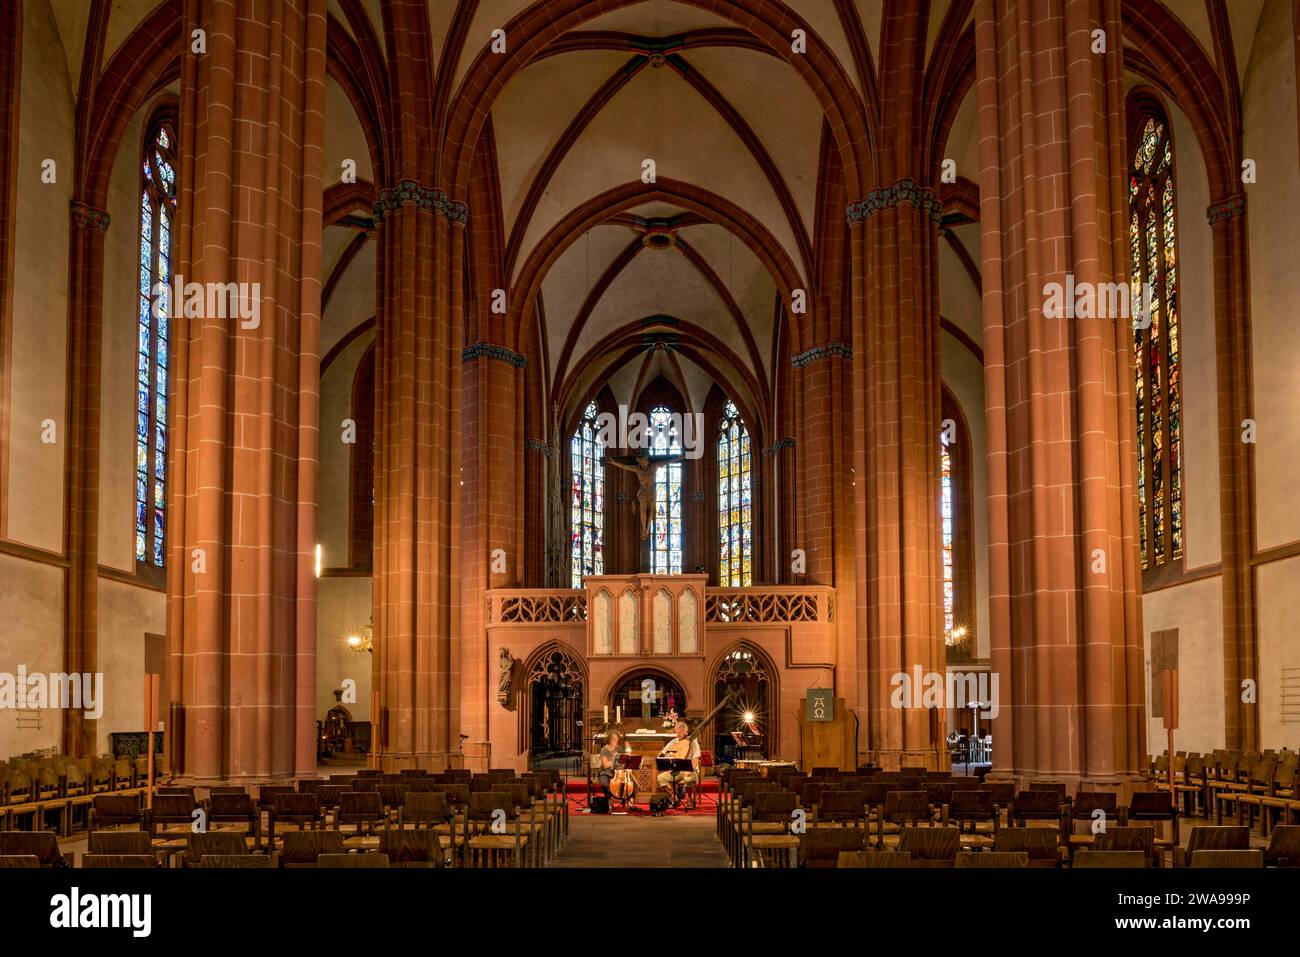 Church of Our Lady, Gothic hall church, interior, nave with cross vault, arcades, altar, rood screen, musicians rehearse for concert, Old Town, Friedb Stock Photo